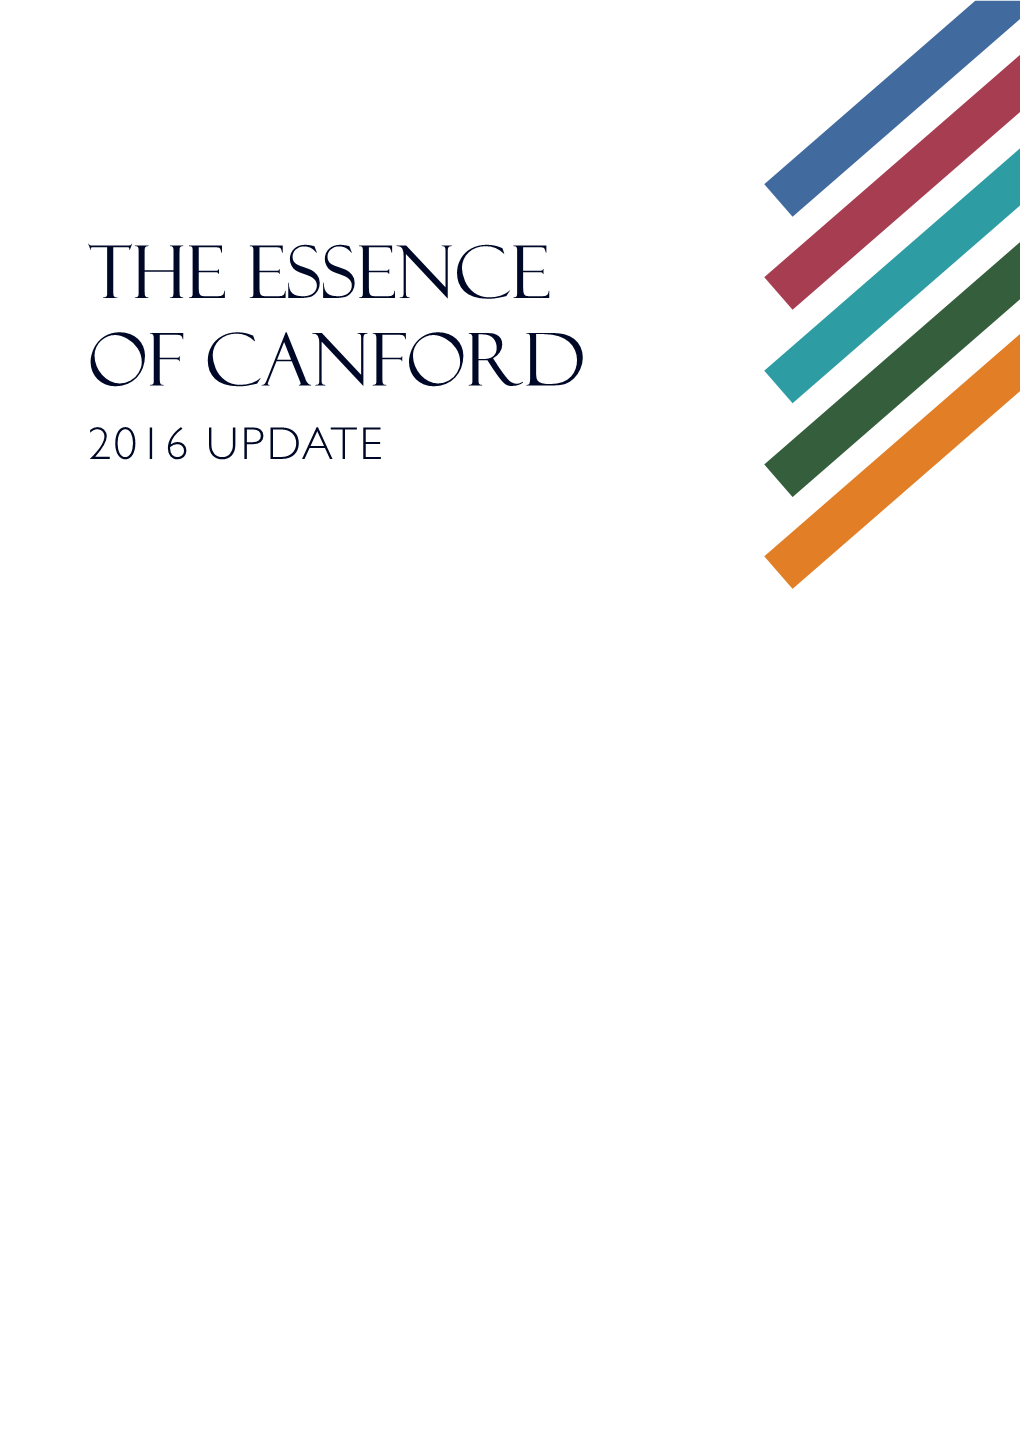 The Essence of Canford 2016 UPDATE the STRATEGIC REVIEW OUR VISION